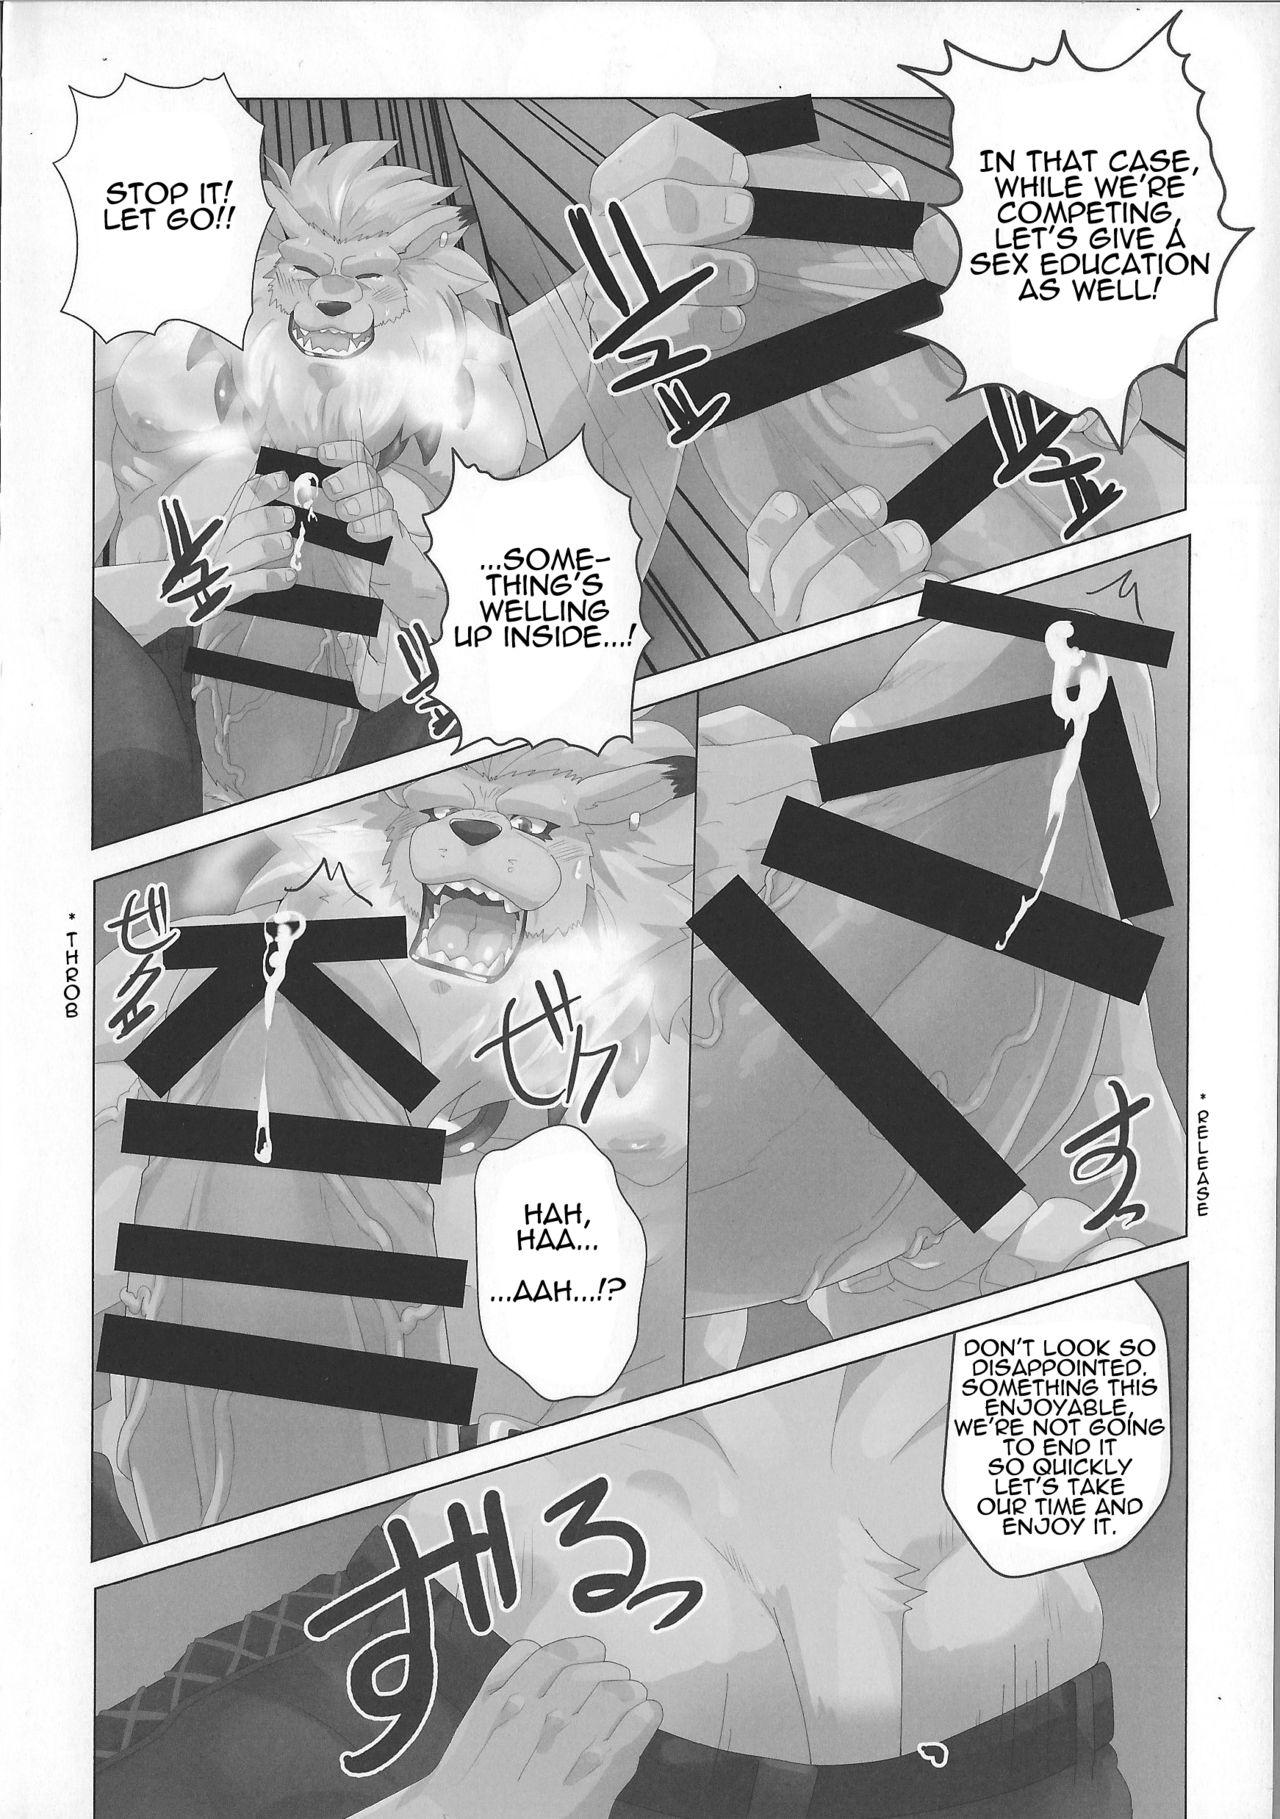 [Debirobu] For the Lion-Man Type Electric Life Form to Overturn Fate - Leomon Doujin [ENG] 13